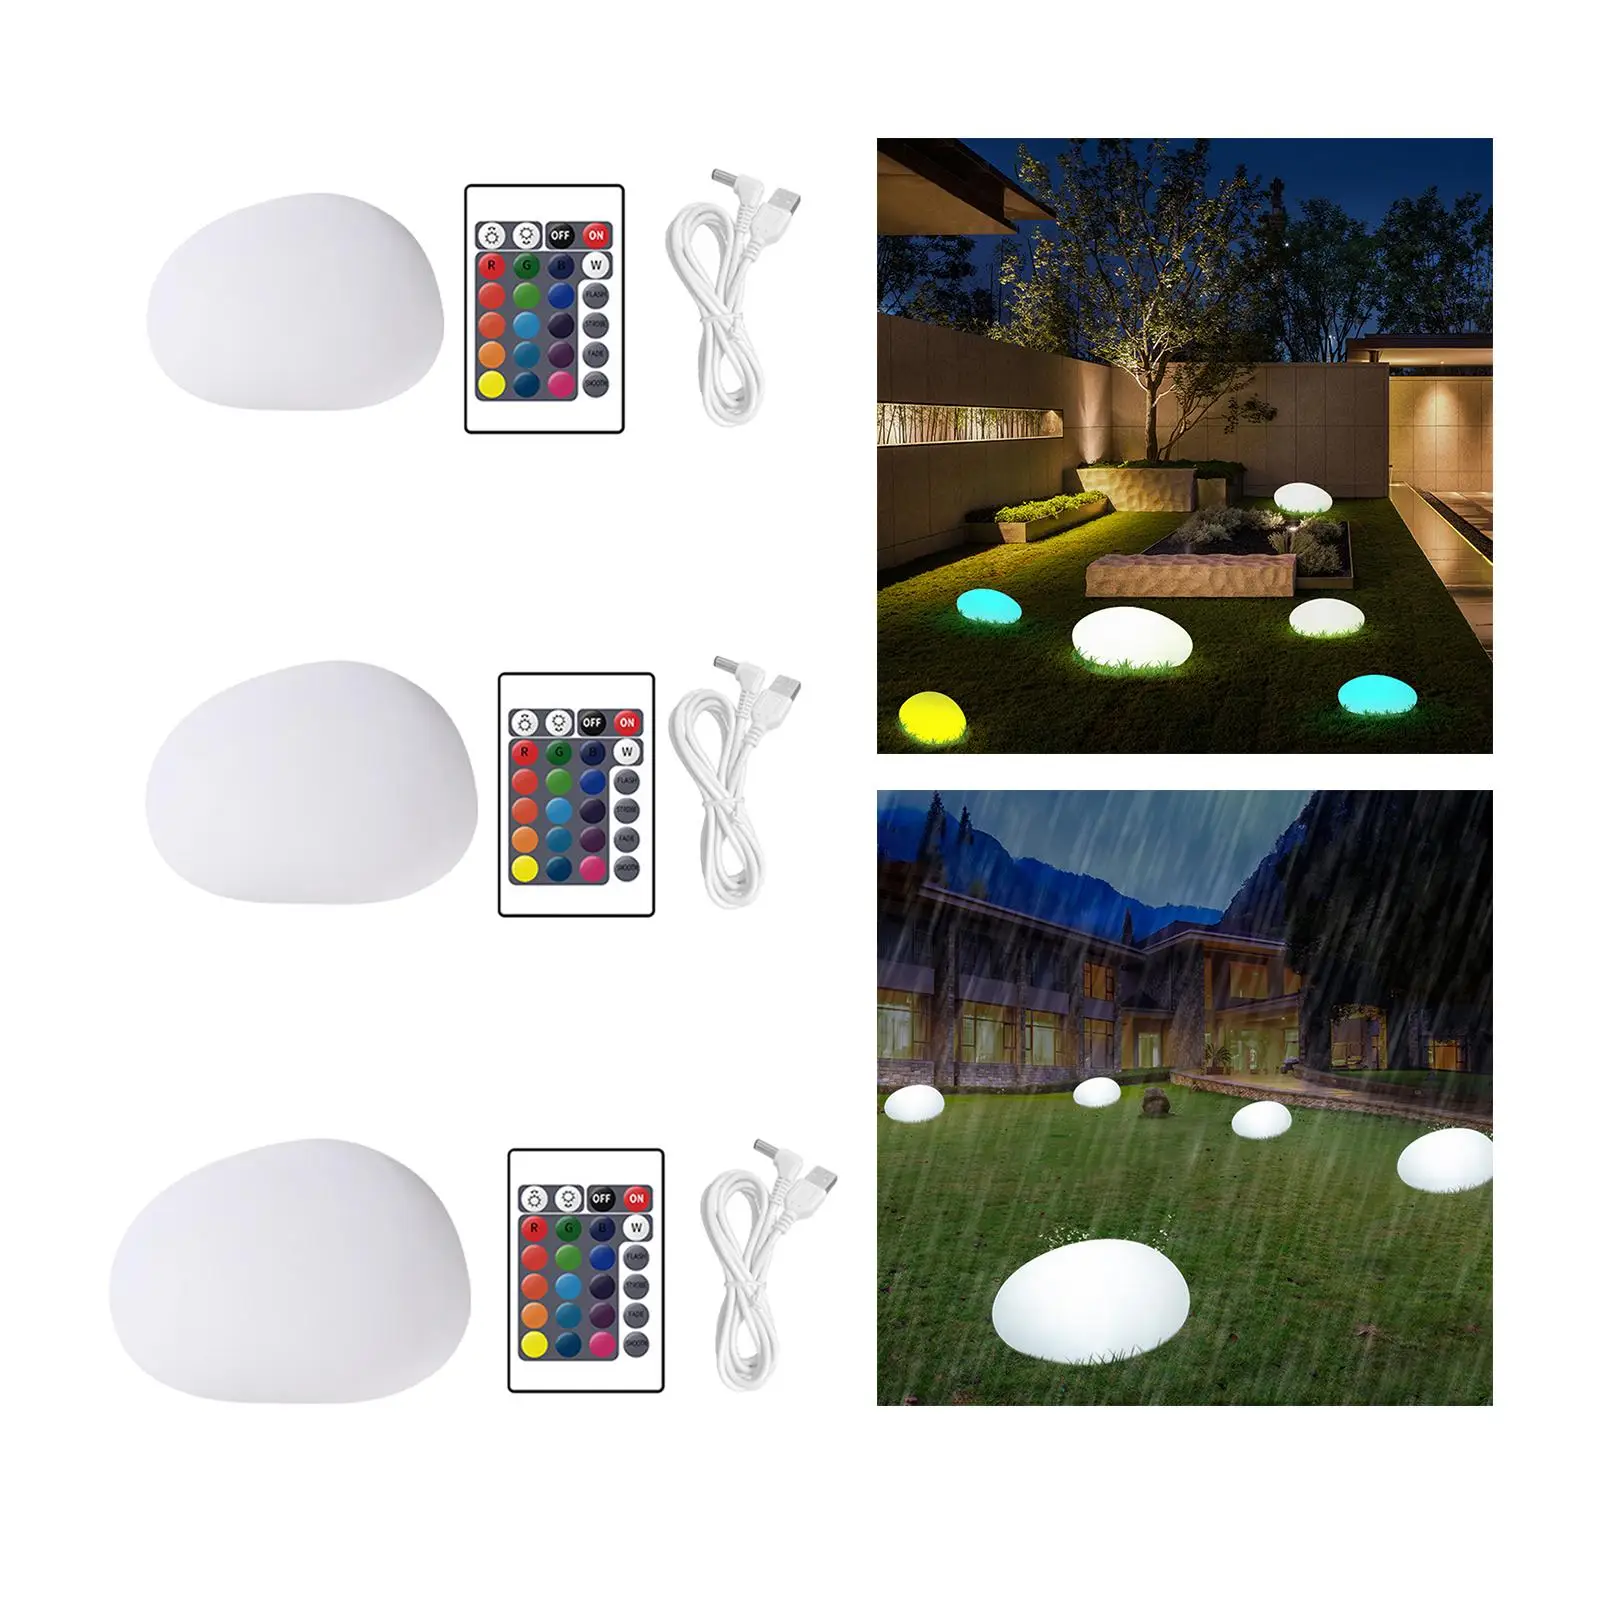 Outdoor Glow Cobble Stone Shape Lamp Lights Color Changing Landscape Night Lights for Festival Poolside Kids Room Party Decor